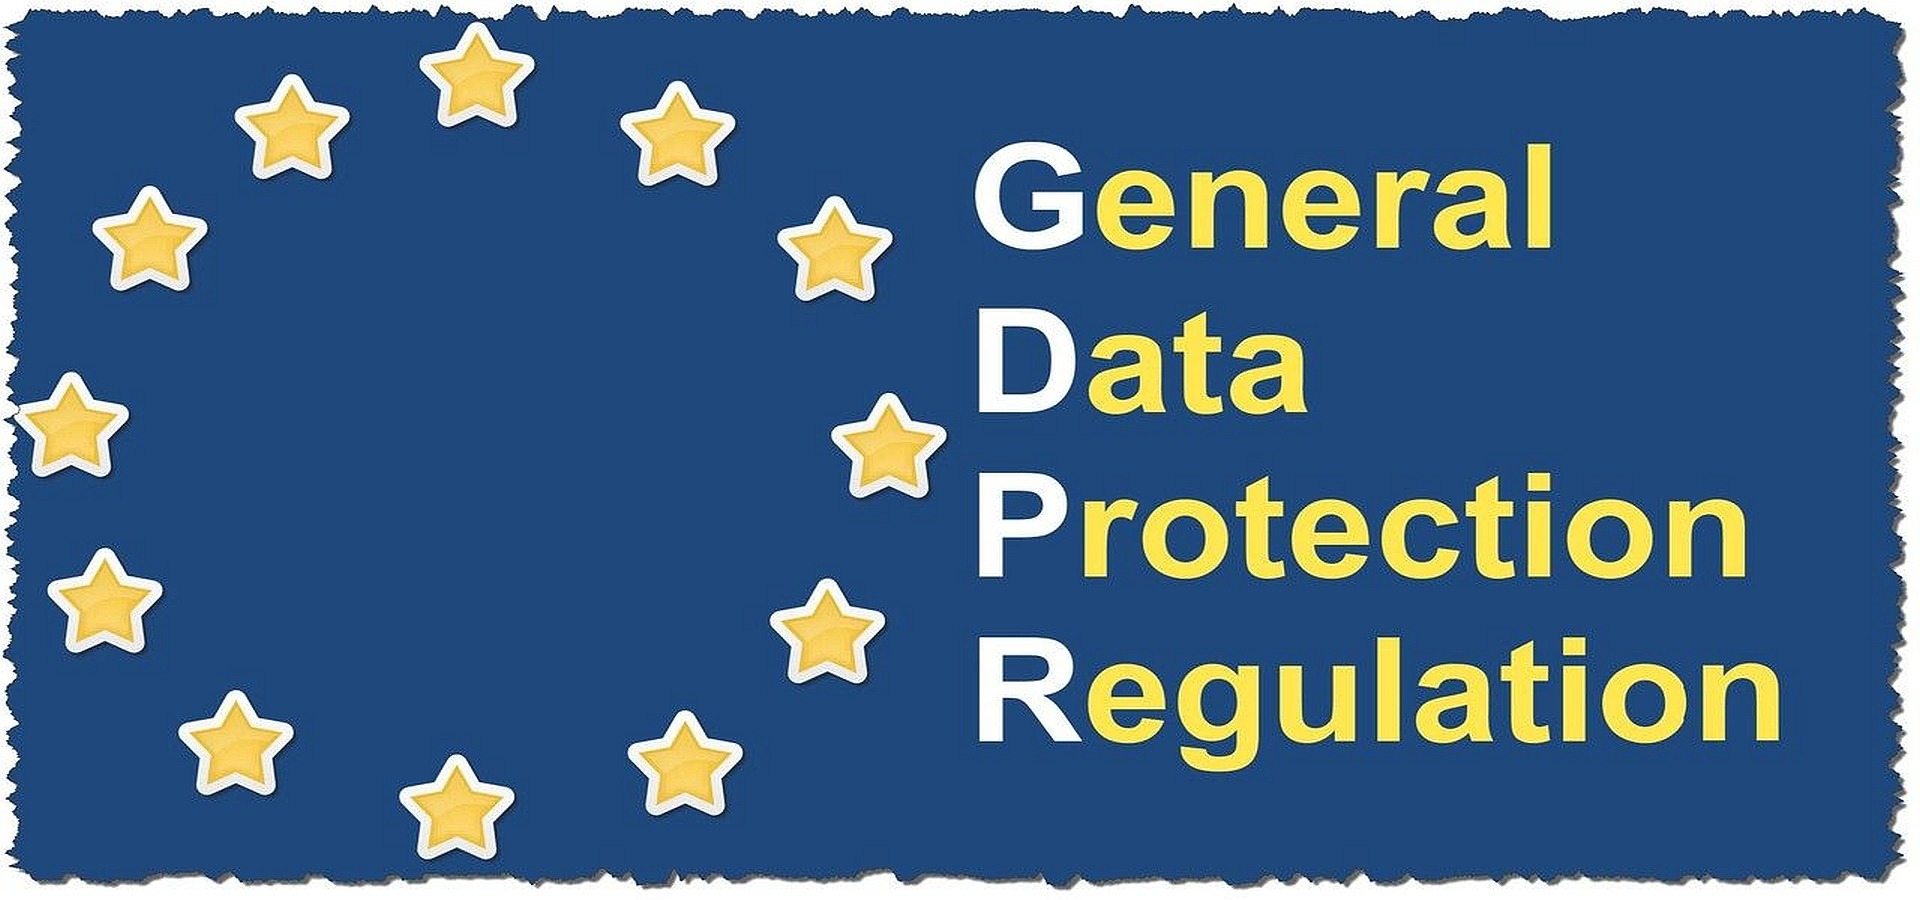 What is the General Data Protection Regulation (GDPR)?